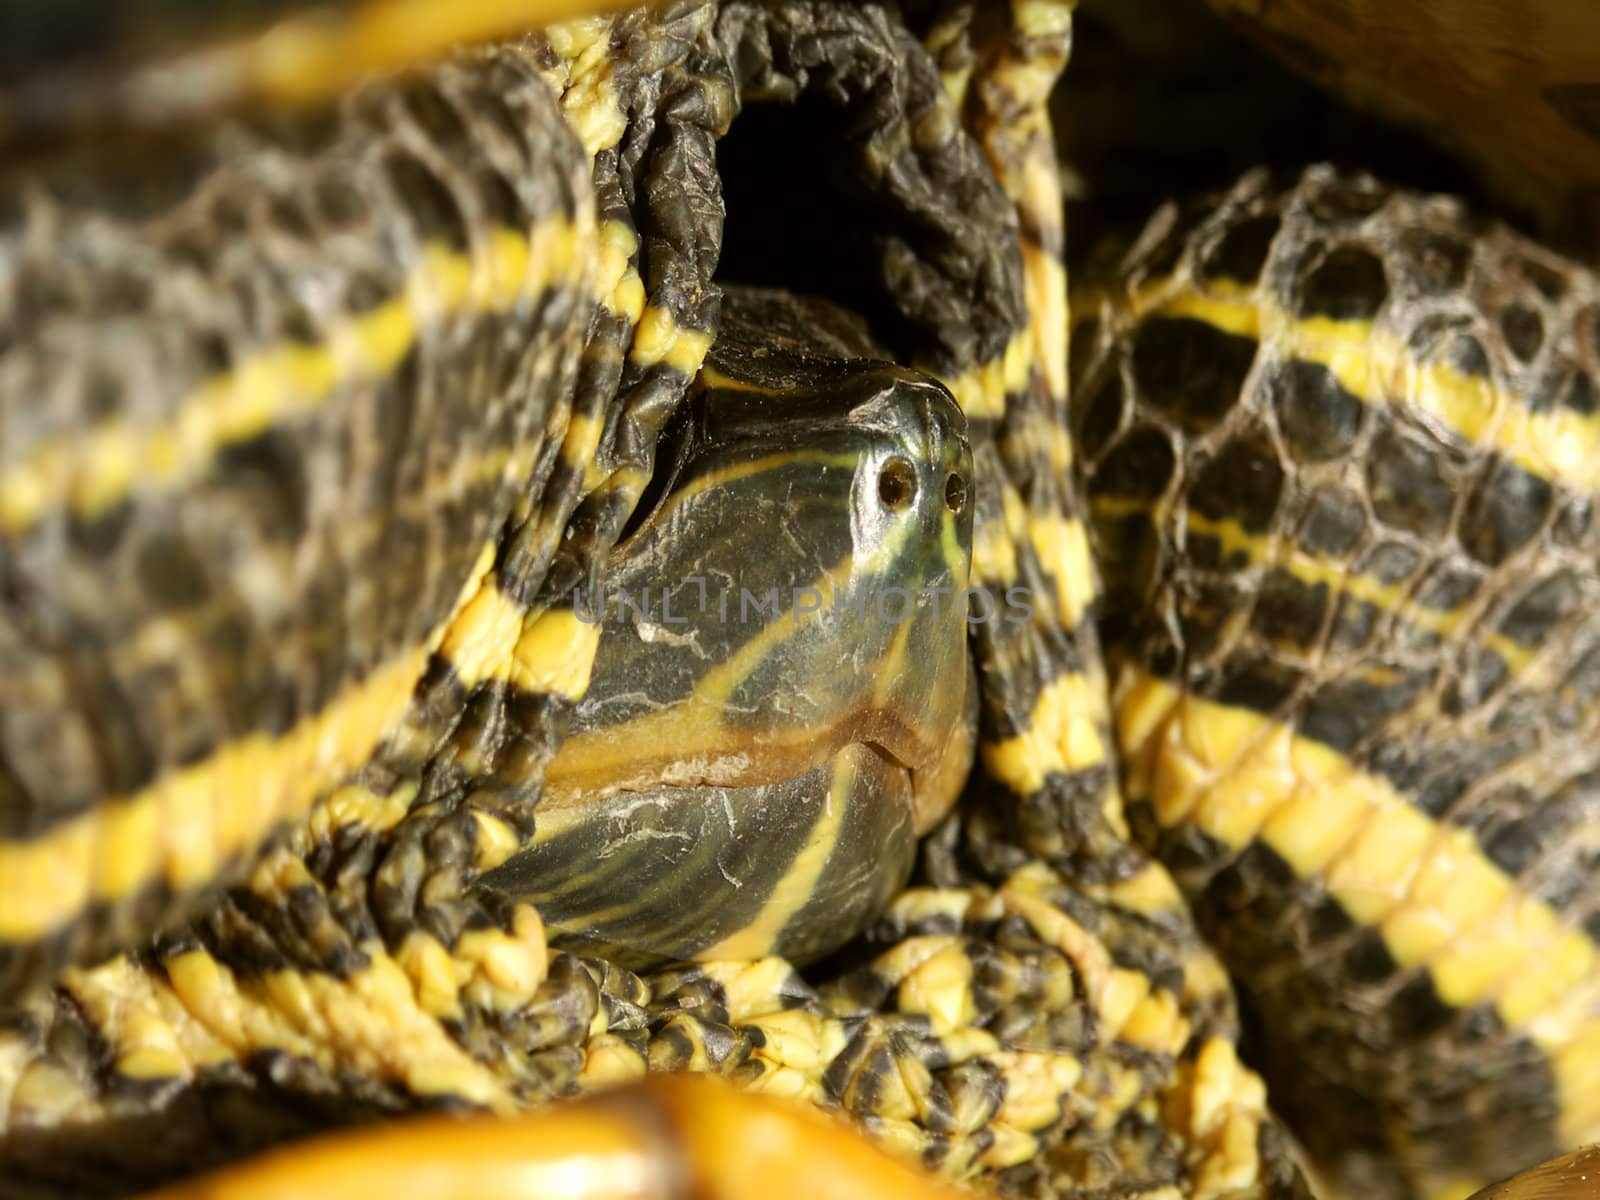 Close up of a Slider Turtle (Trachemys scripta) retreating into its shell in Illinois.